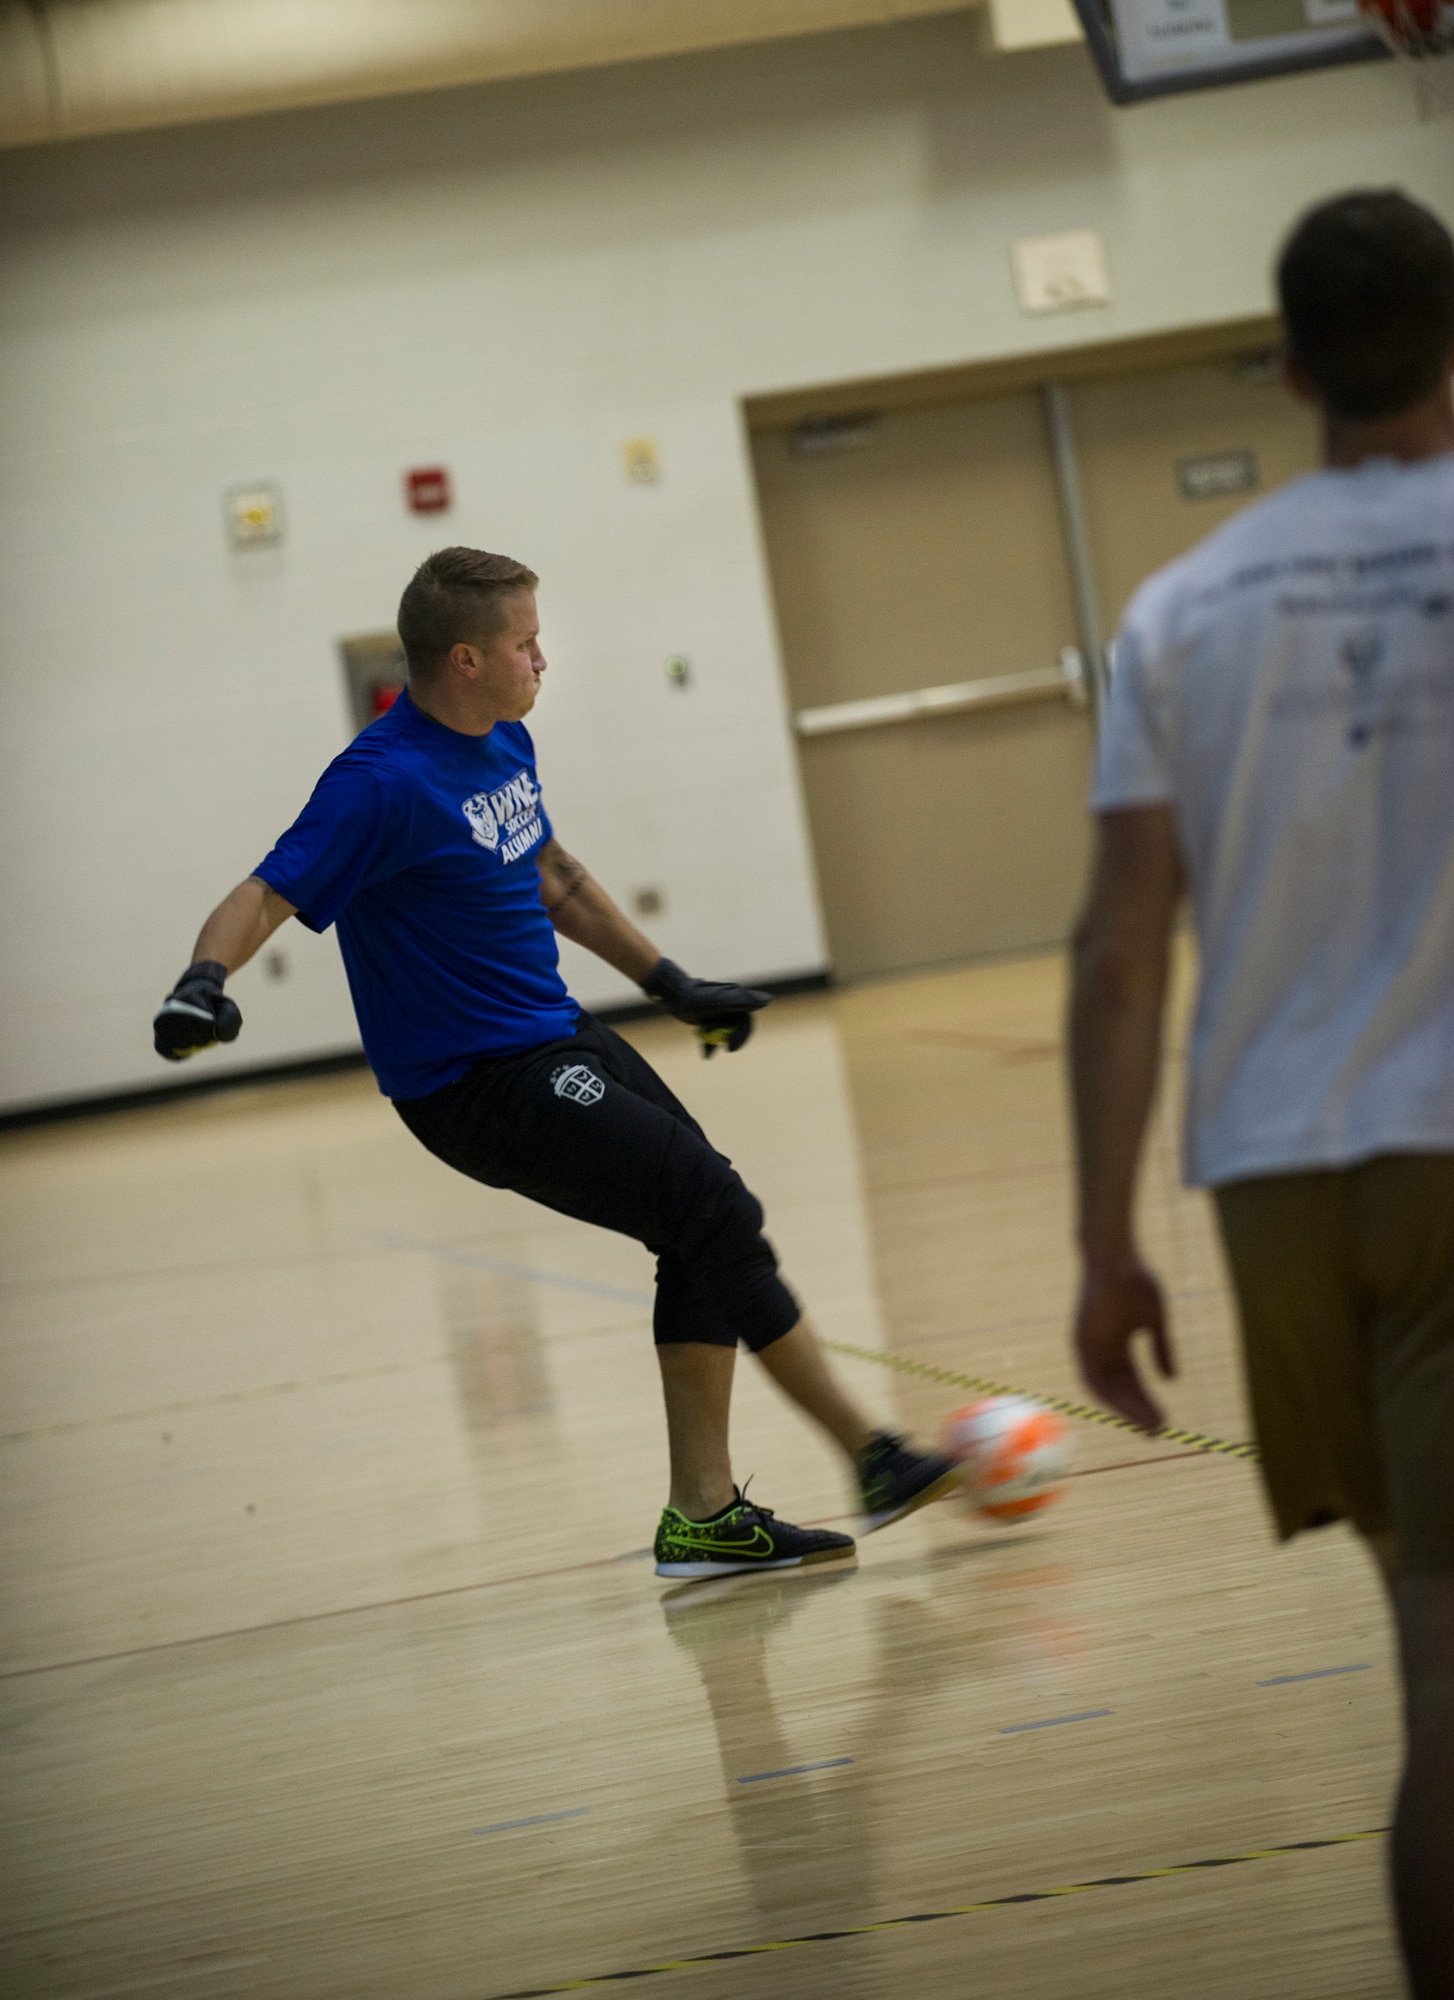 Senior Airman Rian Praleikas, 5th Medical Support Squadron, kicks the ball during the intramural indoor soccer championship at Minot Air Force Base, N.D., Nov. 24, 2015. Praleikas played goalie for the 5th Medical Group team, which ended up losing the game to the 5th Contracting Squadron. (U.S. Air Force photo/Senior Airman Apryl Hall)